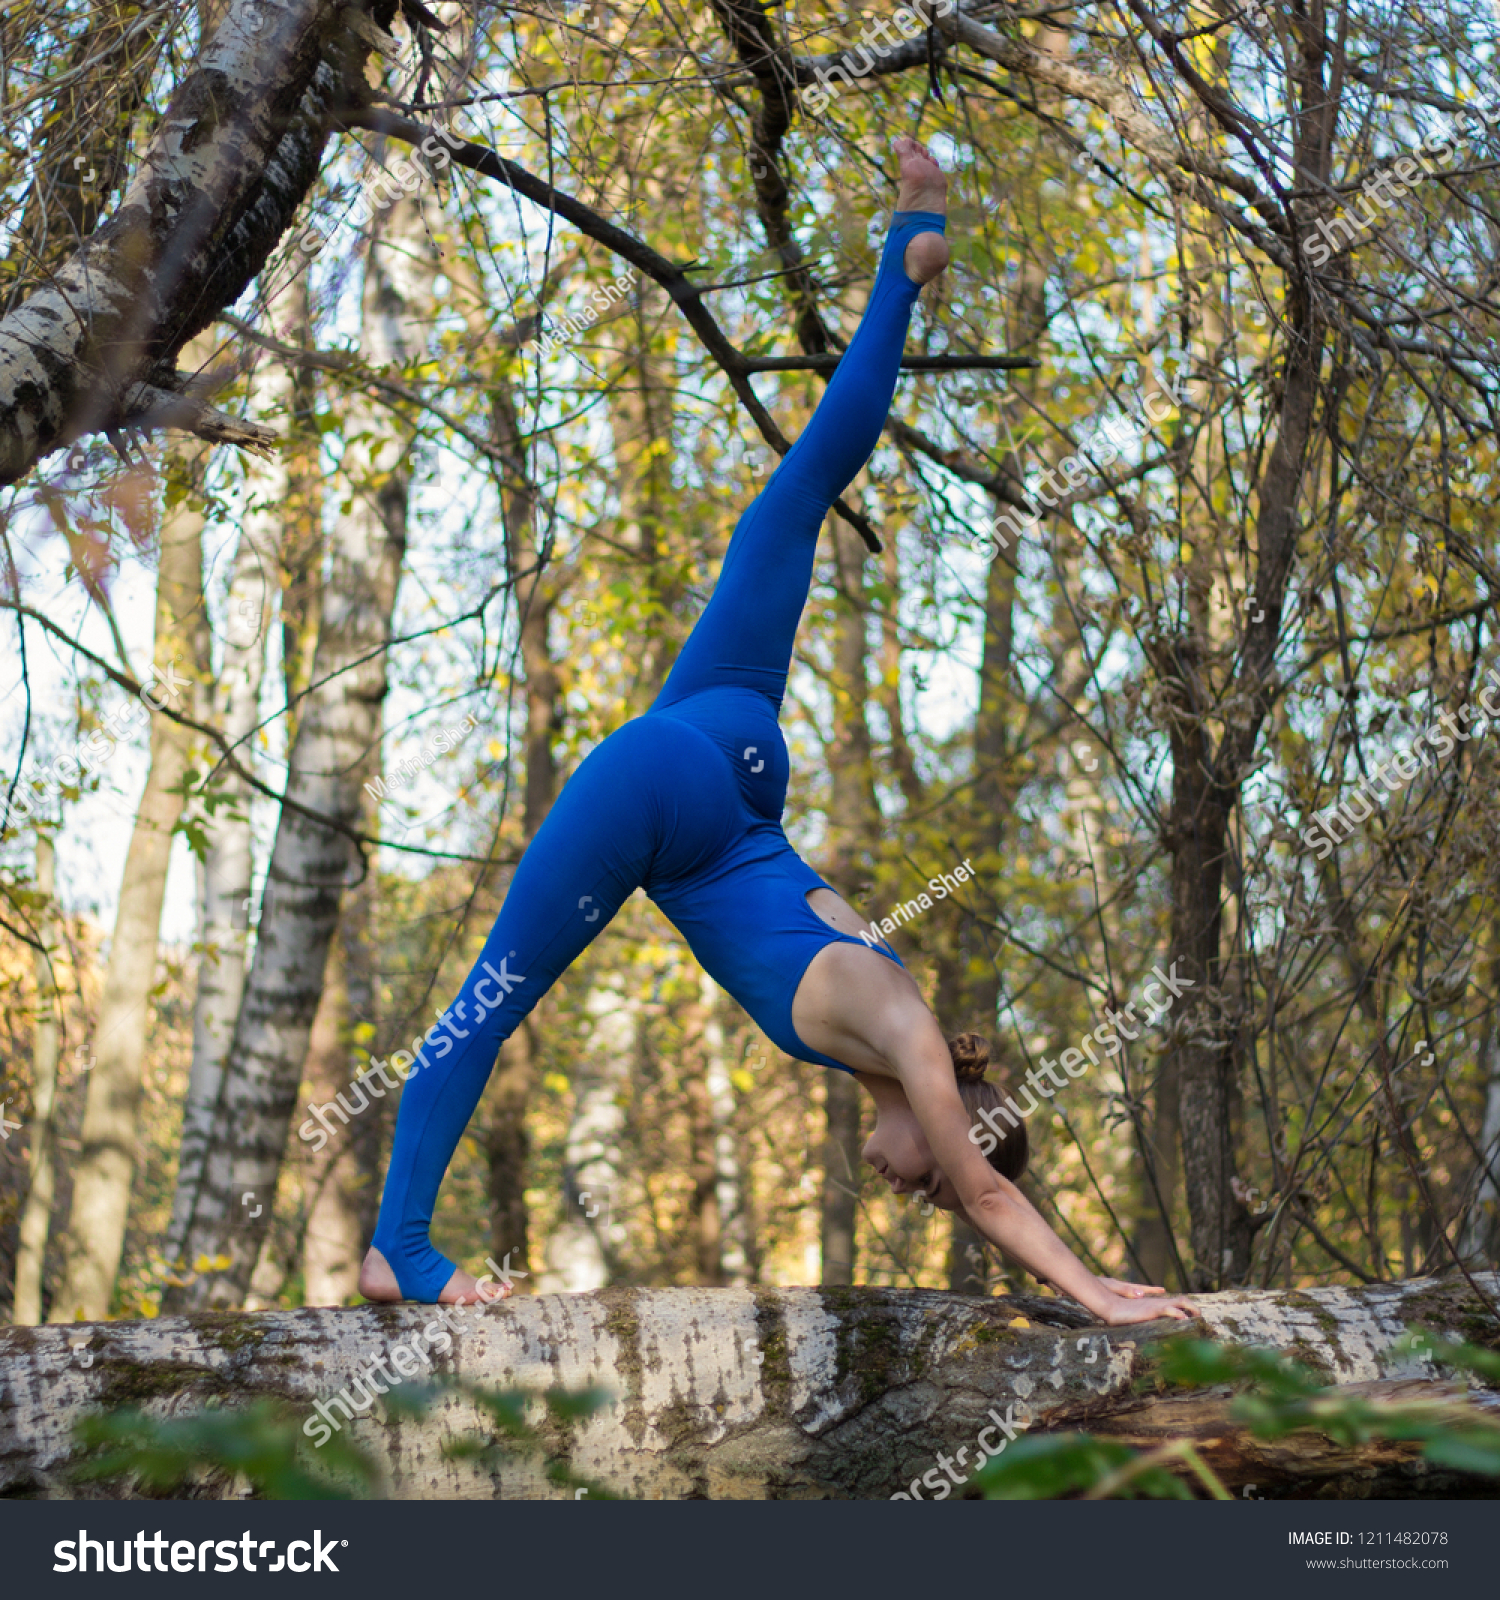 https://image.shutterstock.com/z/stock-photo-girl-doing-stretching-on-the-tree-in-the-forest-1211482078.jpg